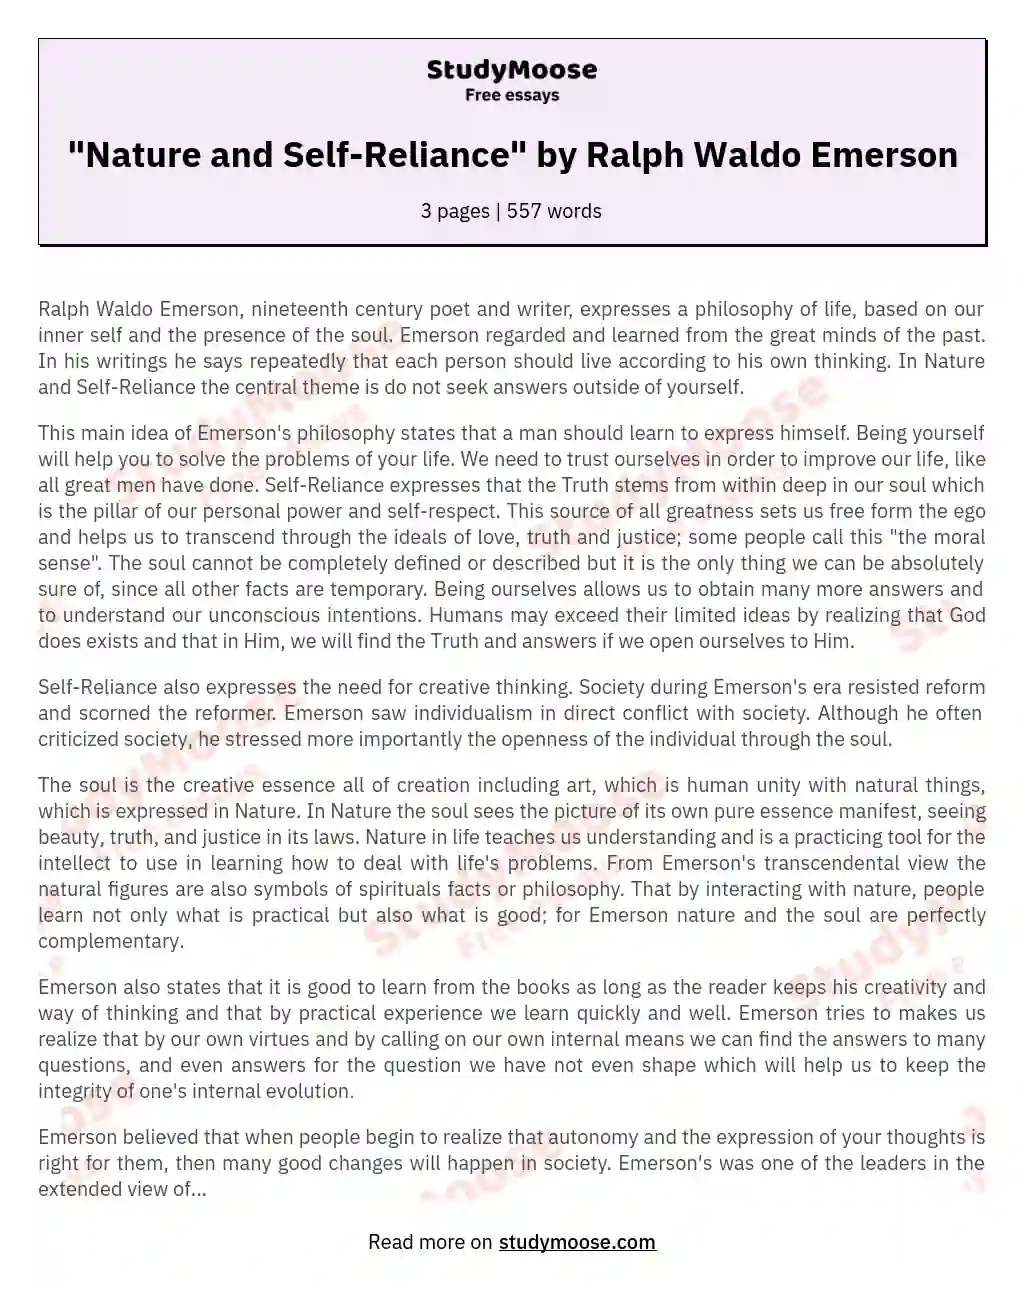 "Nature and Self-Reliance" by Ralph Waldo Emerson essay